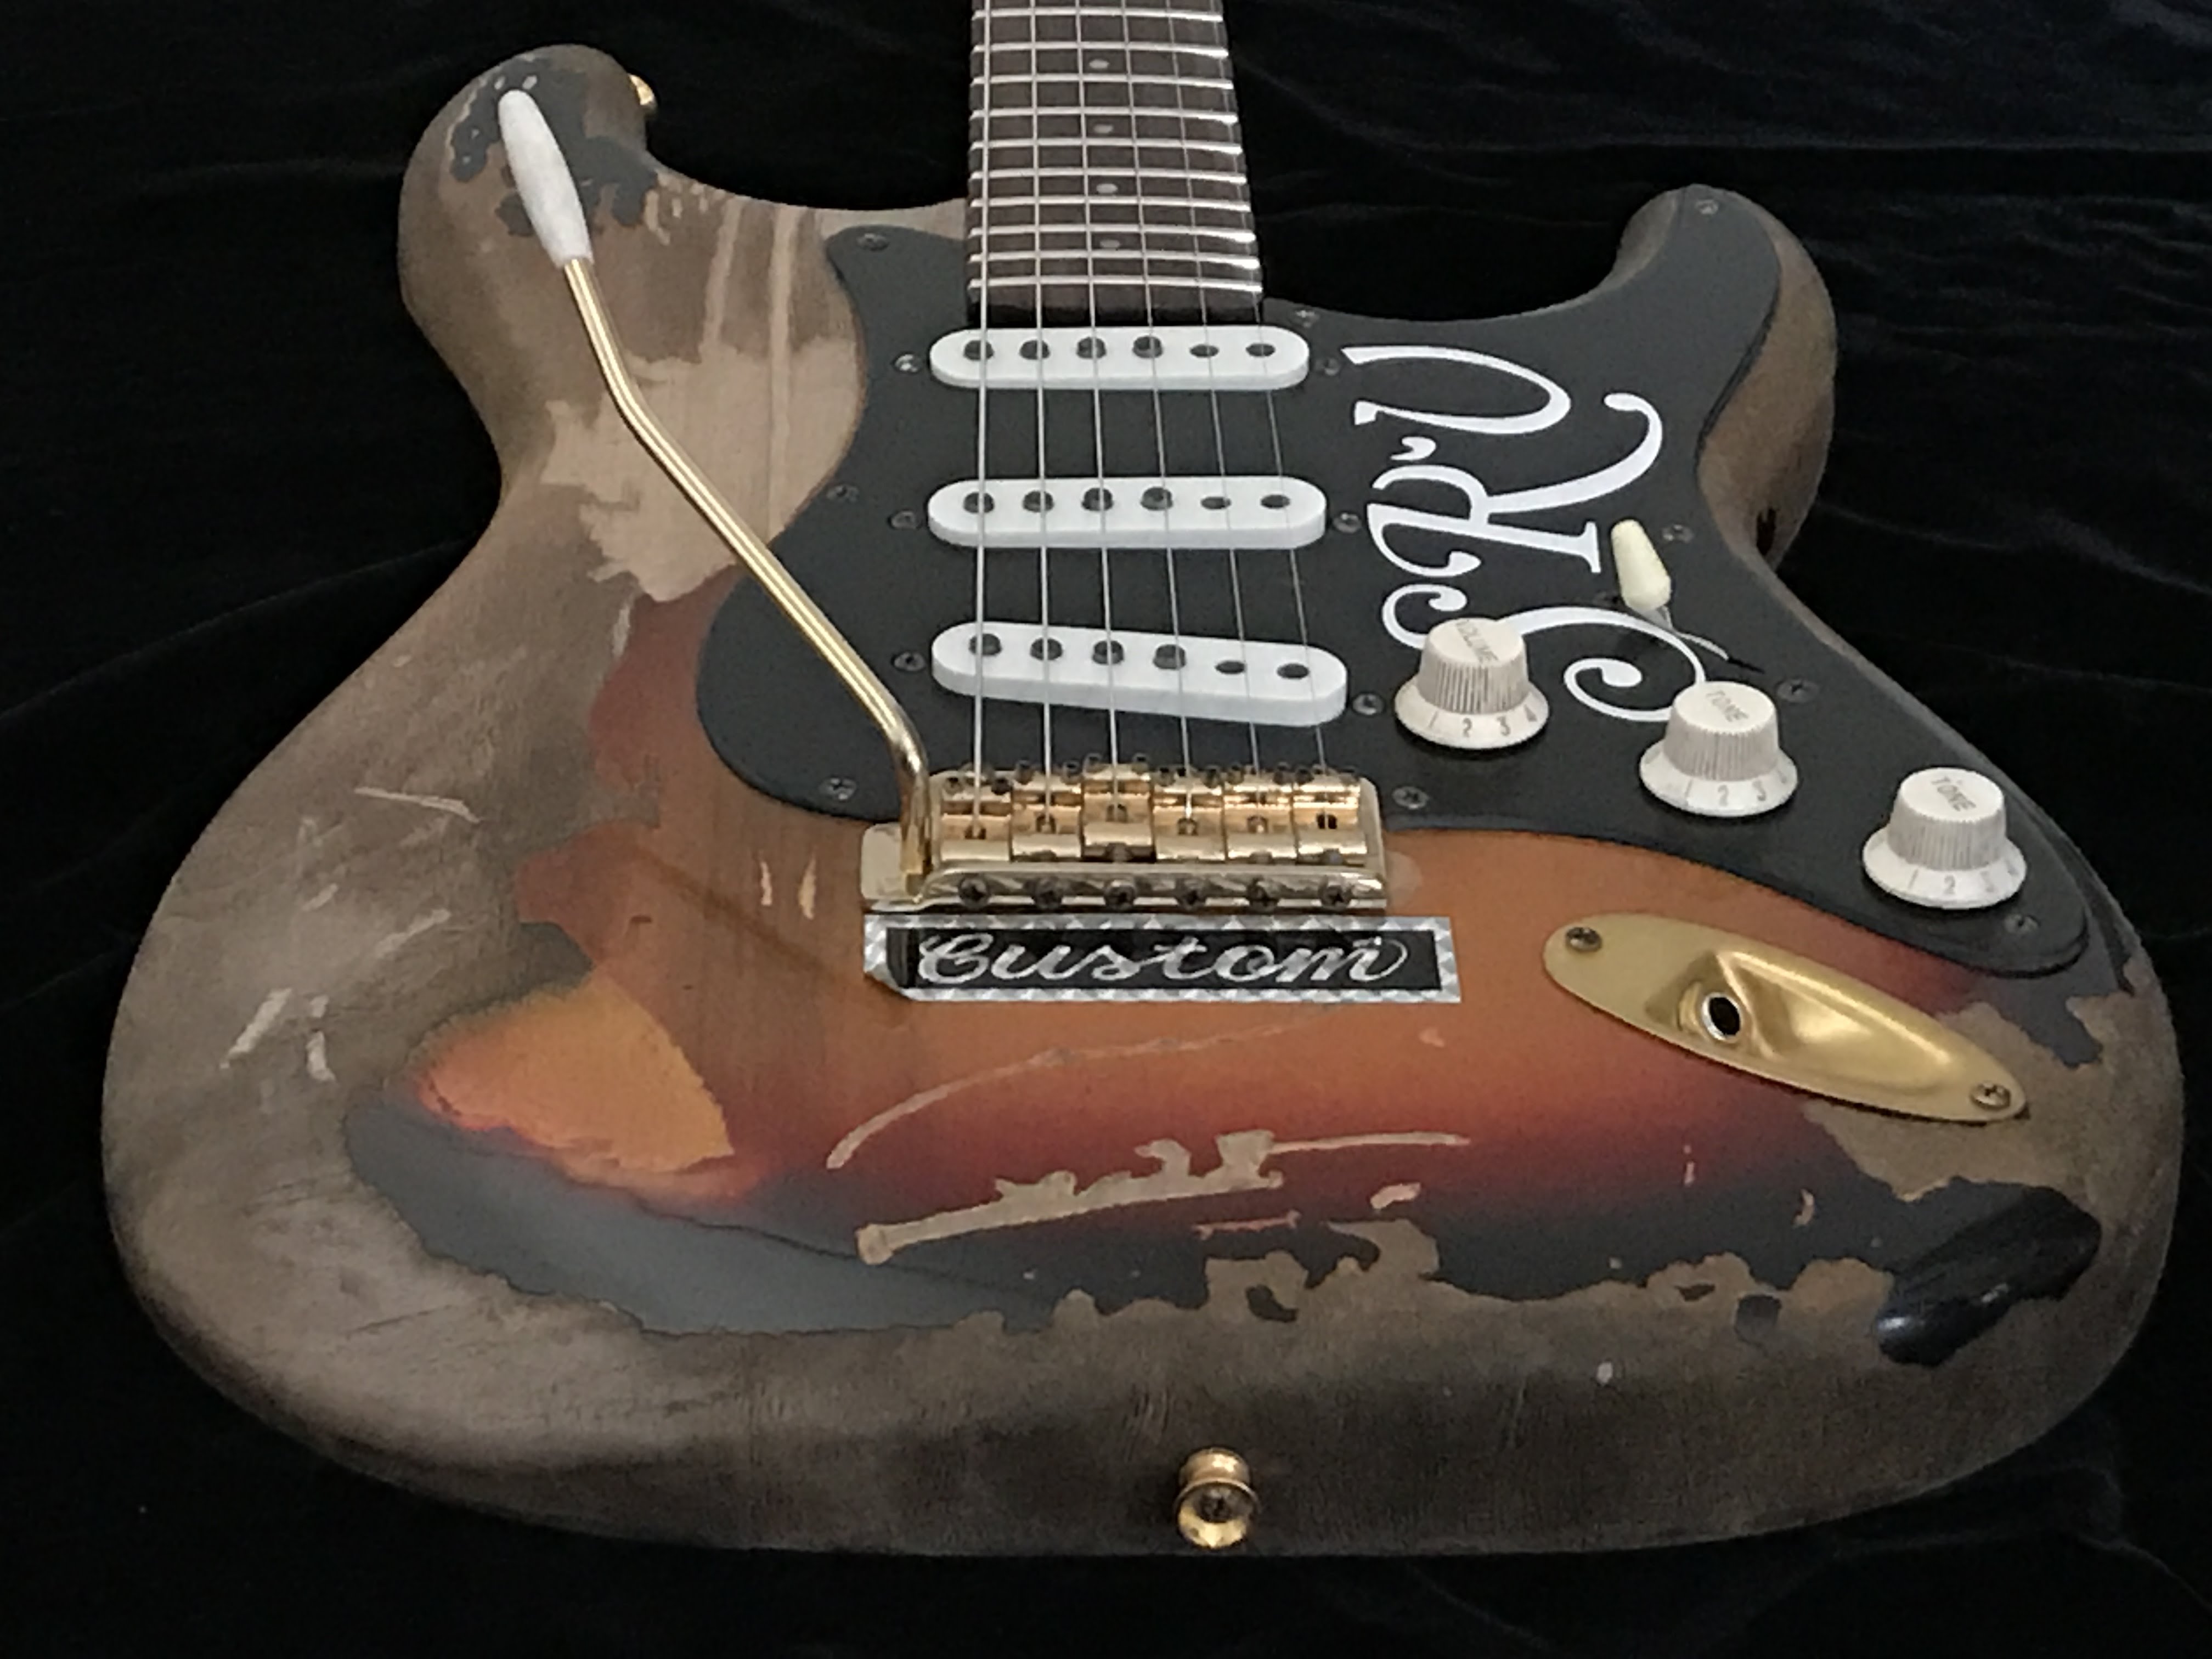 Remodeled Stevie Ray Vaughan Number One Vintage Style A0408001